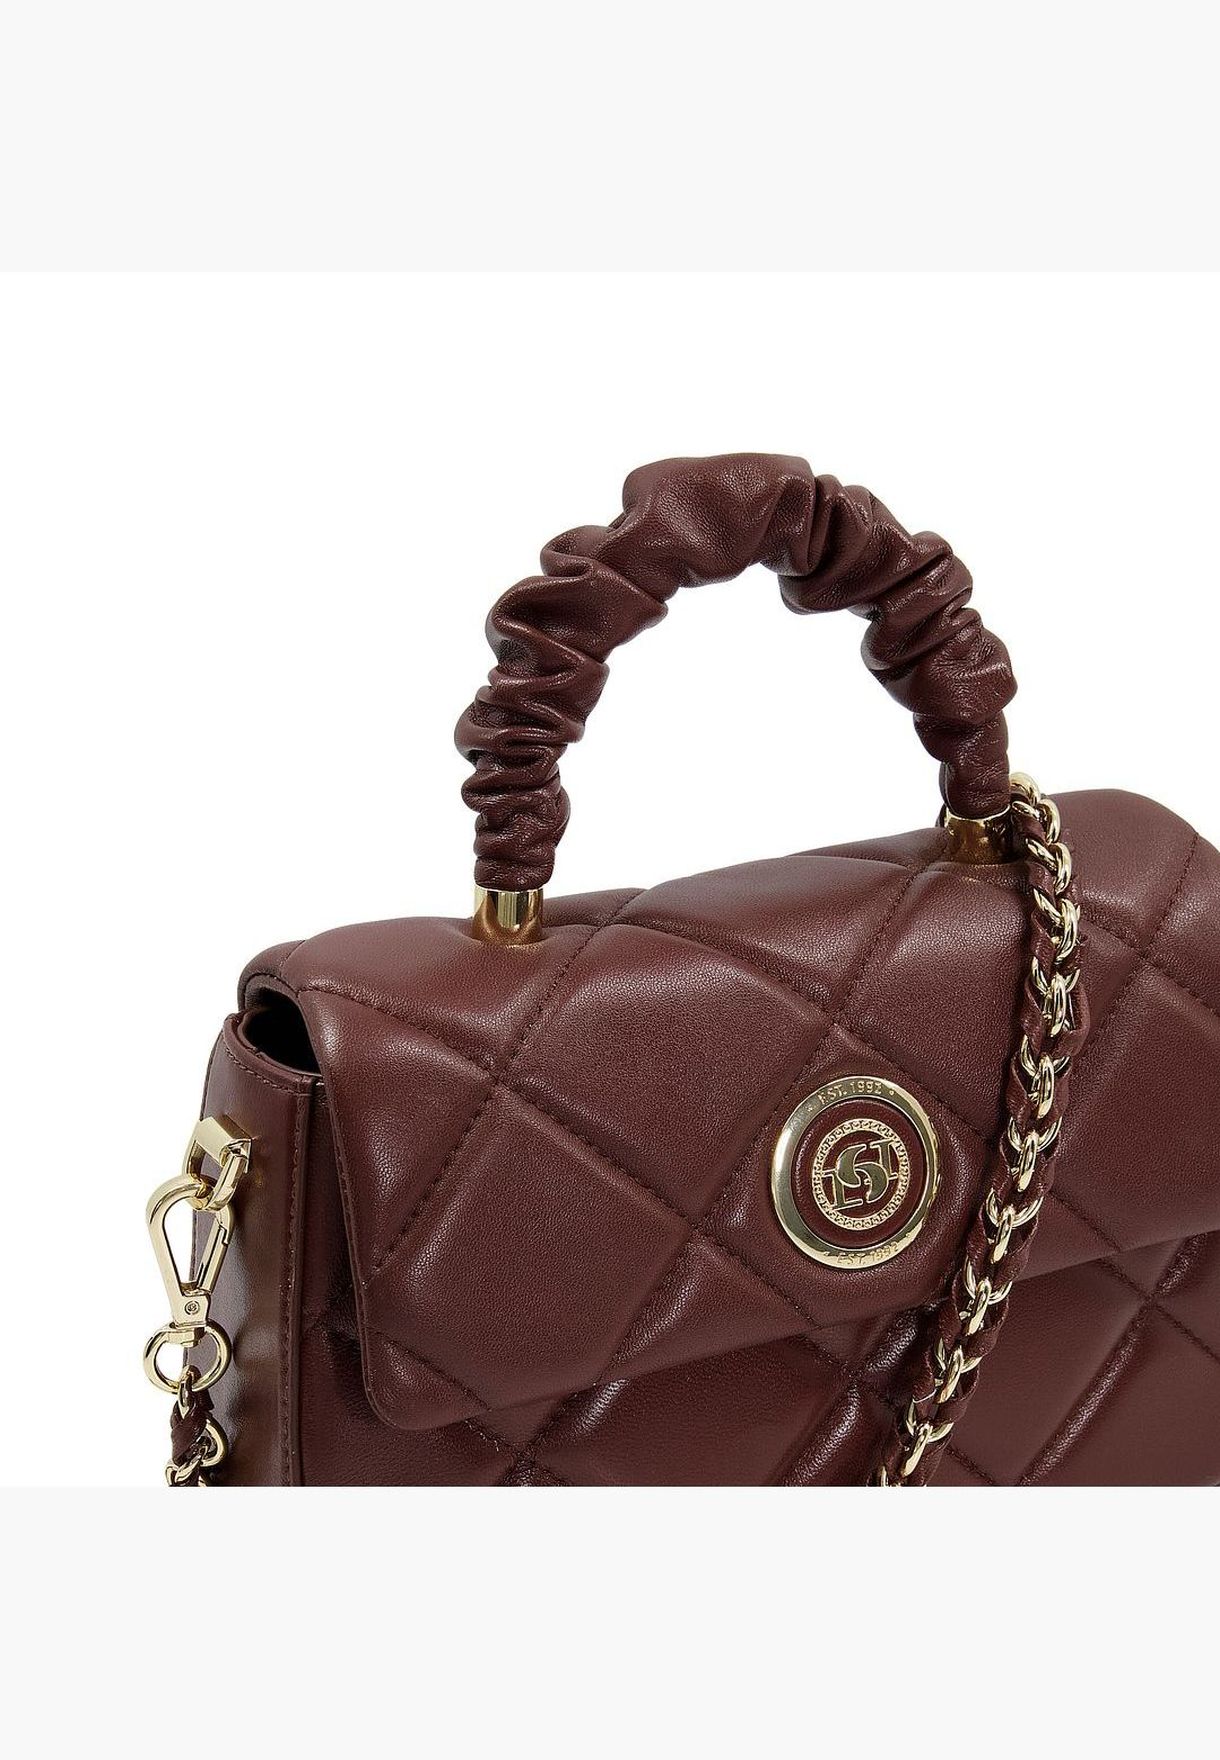 Duchess R Quilted Ruched Top Handle Mini Bag